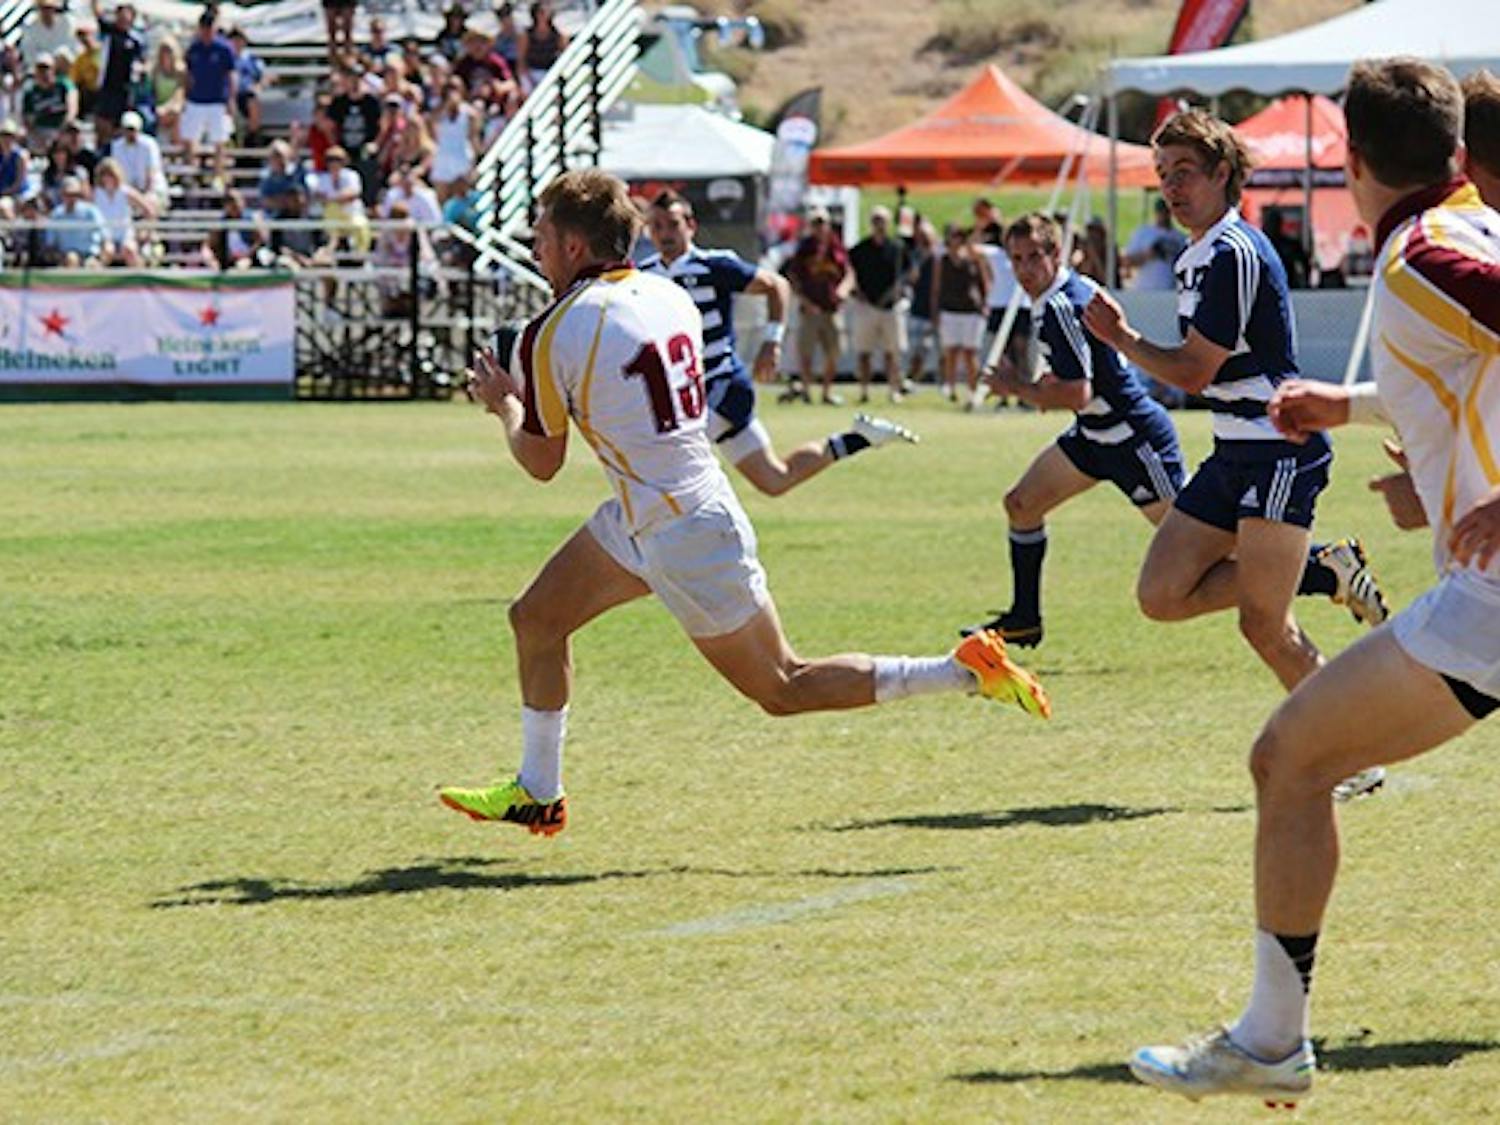 Senior center Adam Sandstrom runs toward the end zone at the Rugby Bowl against BYU on April 12. ASU lost to BYU 52-26.